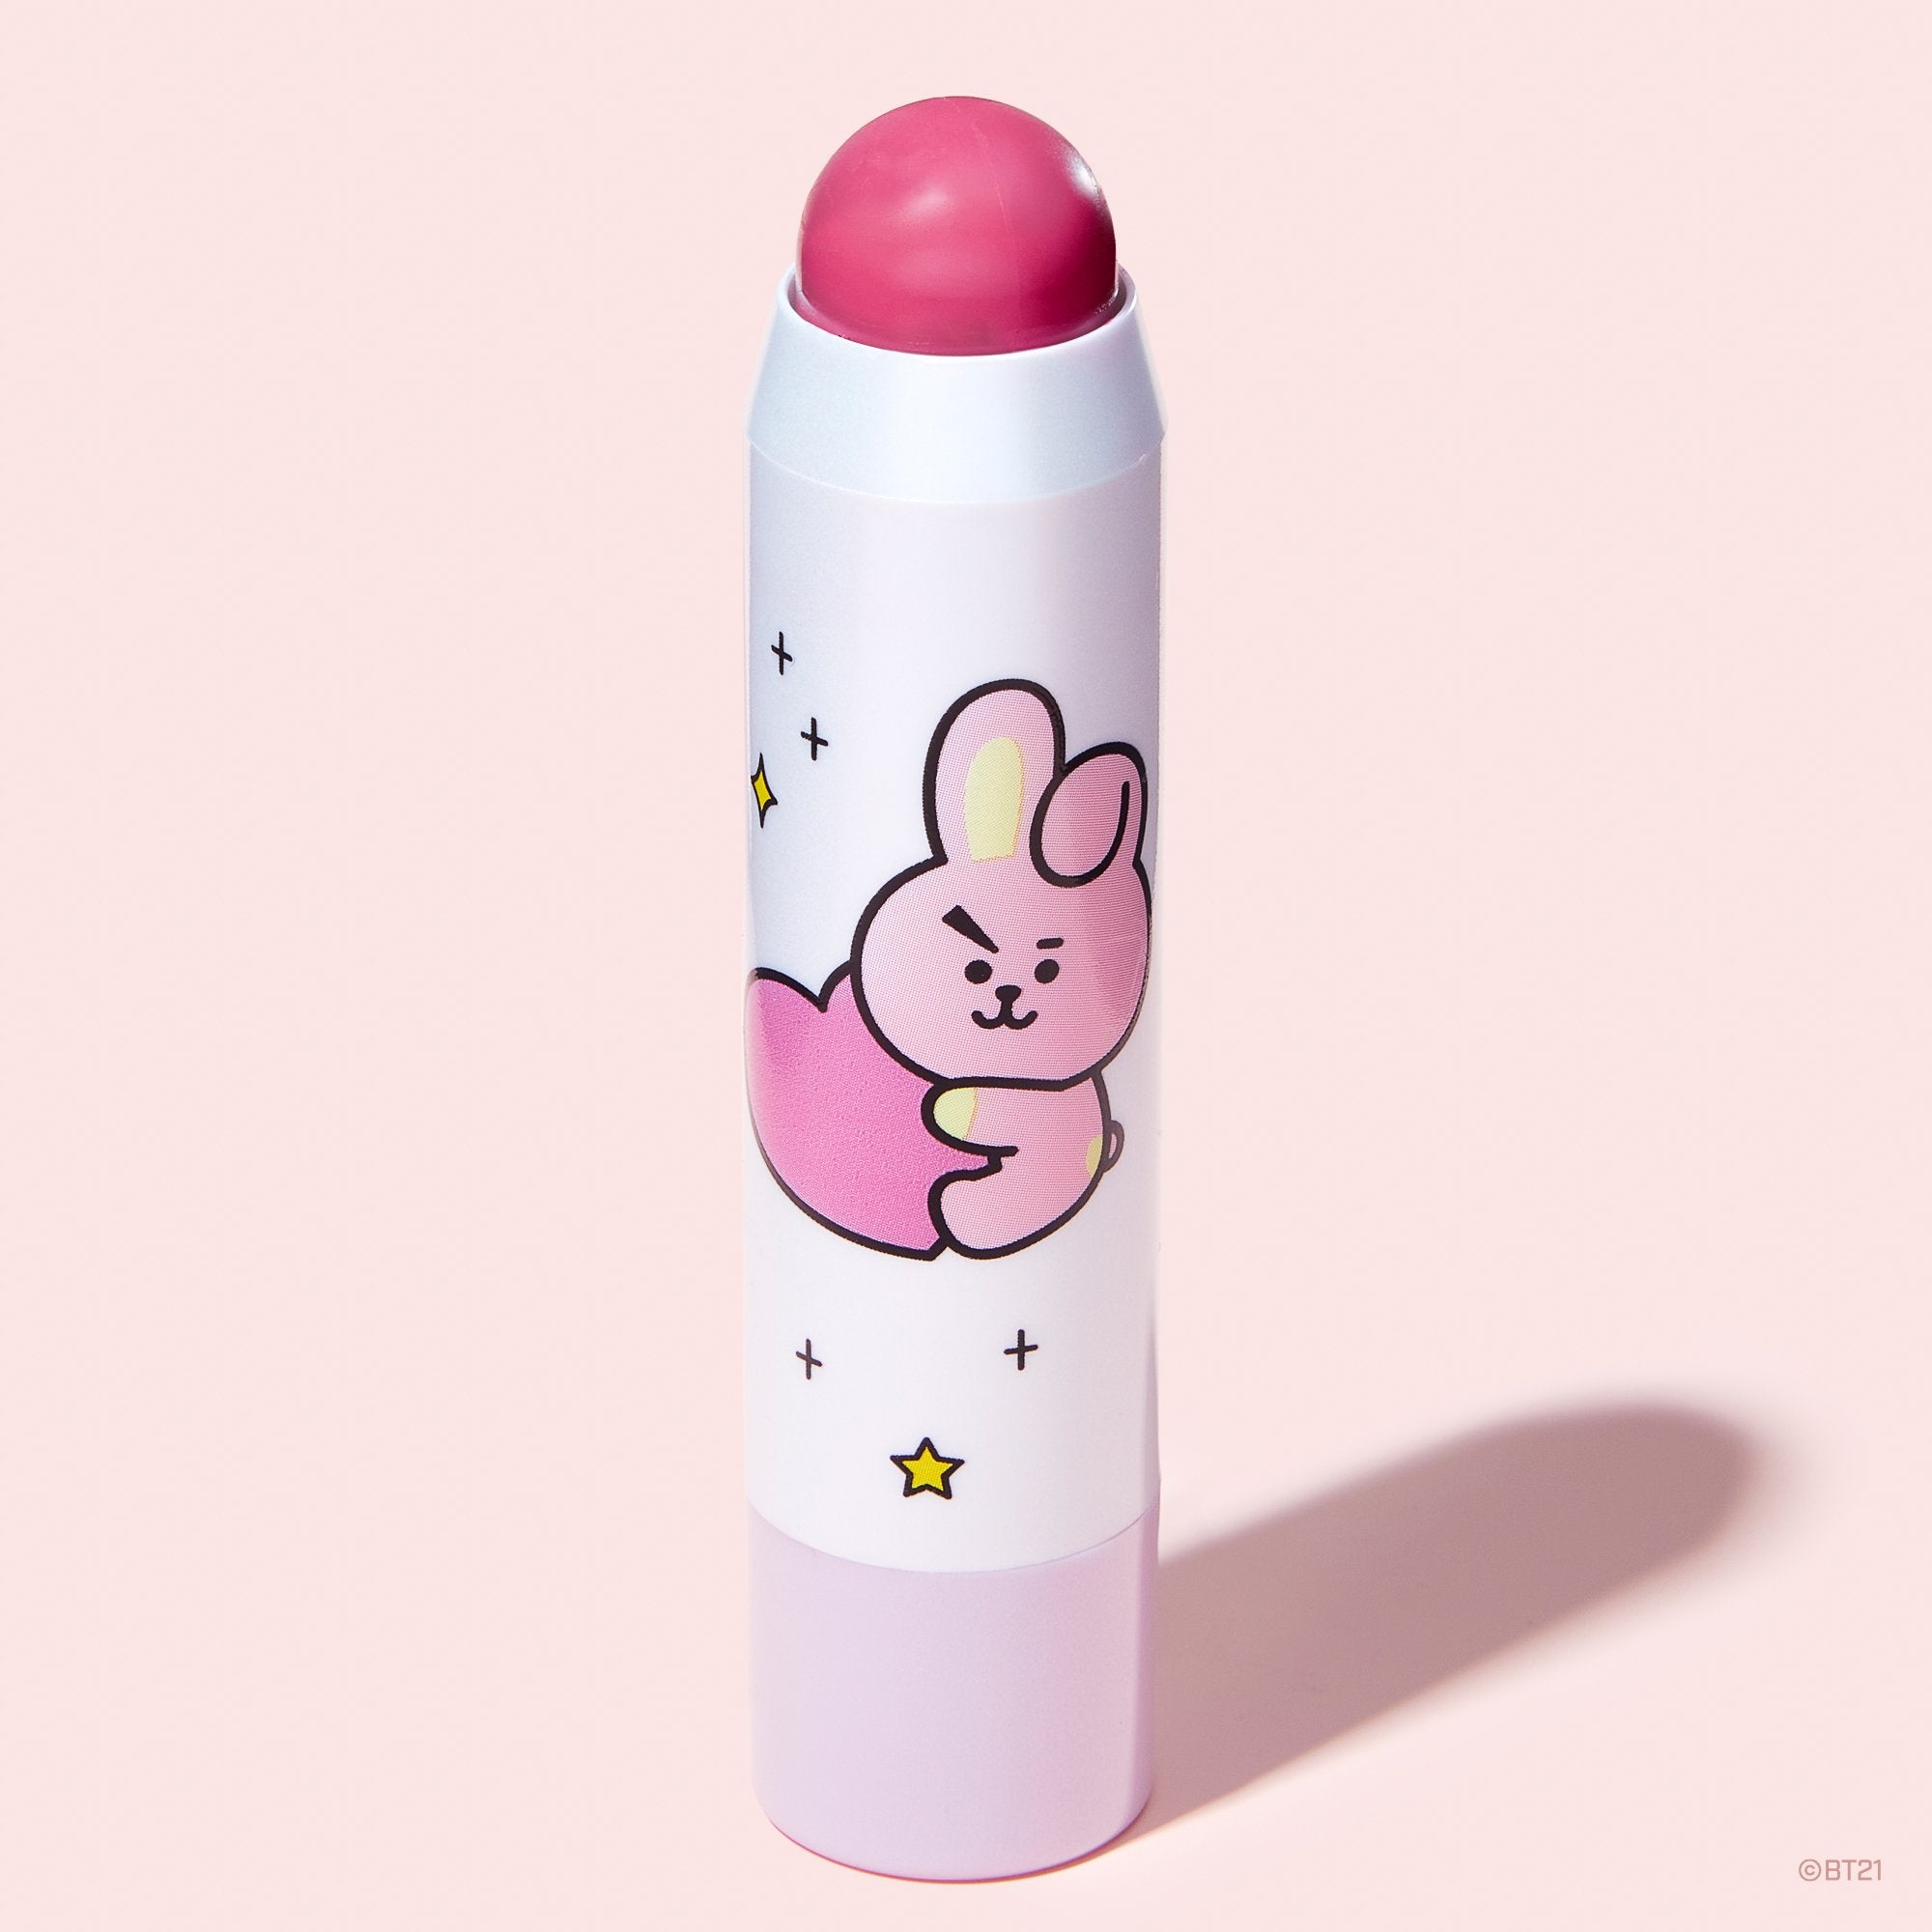 Lip + Cheek Chic Stick | Tinted Essence Stick (Enriched with Hyaluronic Acid & Vitamin E) Lip & Cheek Chic Stick The Crème Shop x BT21 Berry Cute (COOKY) 